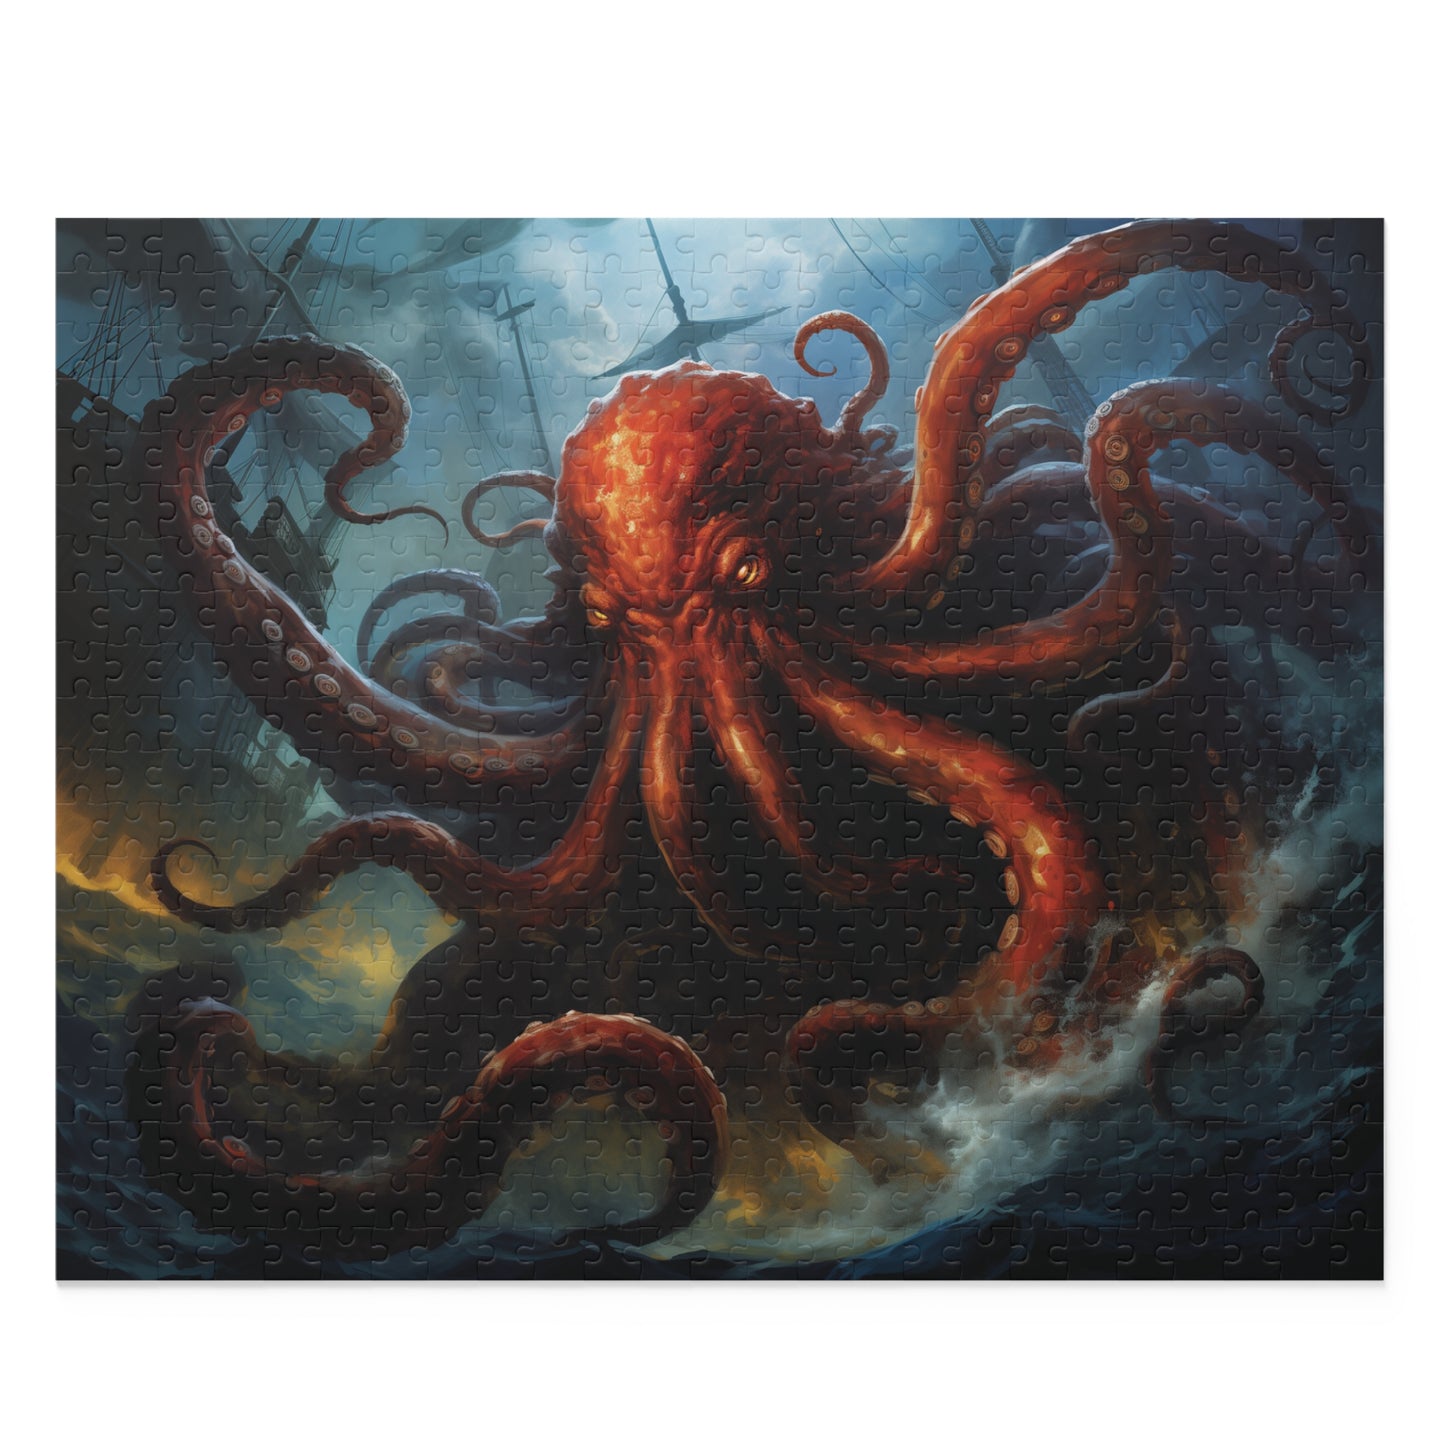 Kraken Attack Puzzle, Giant Octopus Jigsaw Puzzles, 120 pieces, 252 pieces, 500 pieces, Family Game Puzzle, Fantasy Creature Lover Gift